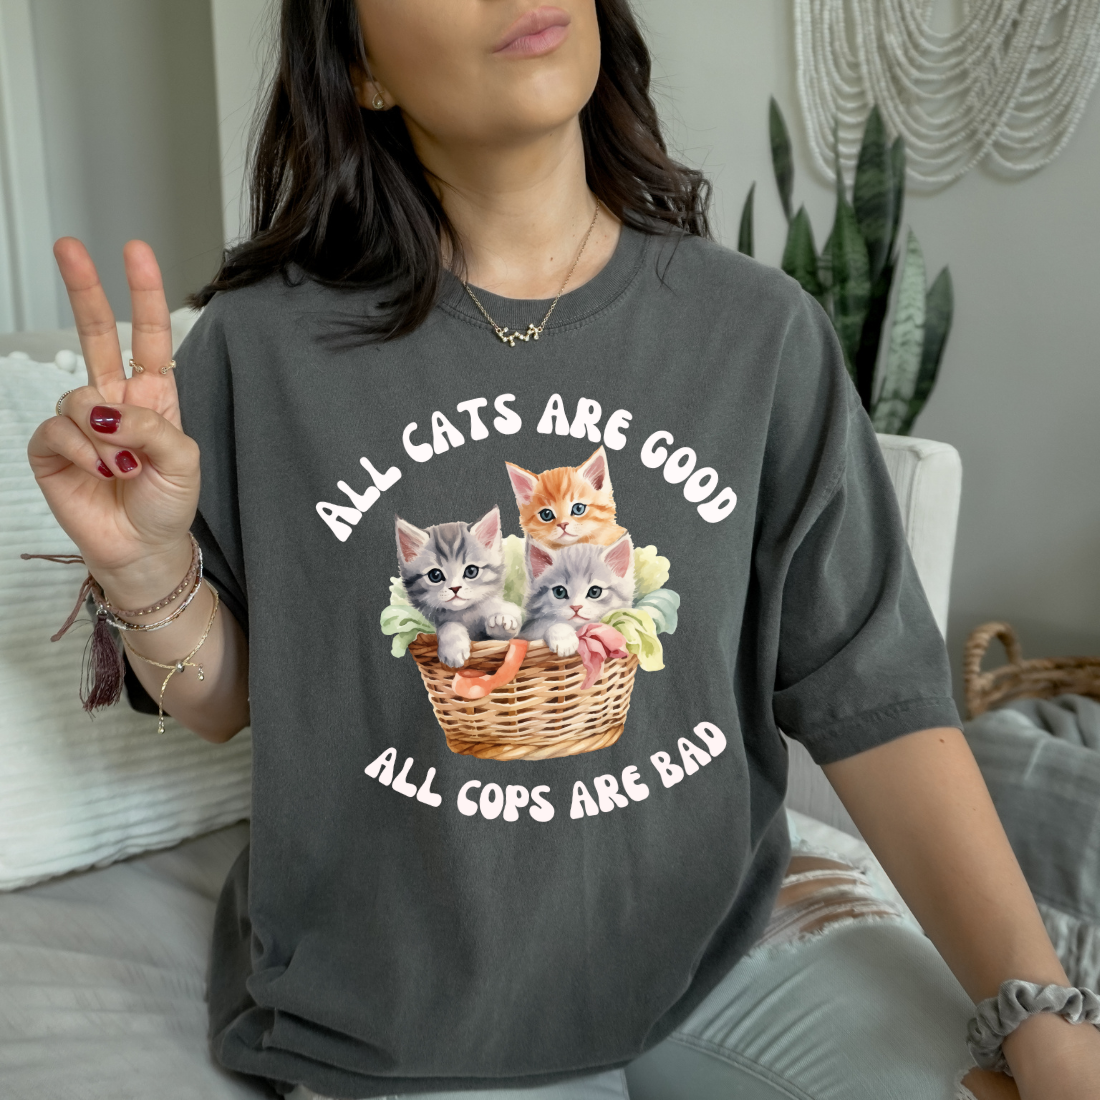 All cats are good, ACAB Unisex Tshirt